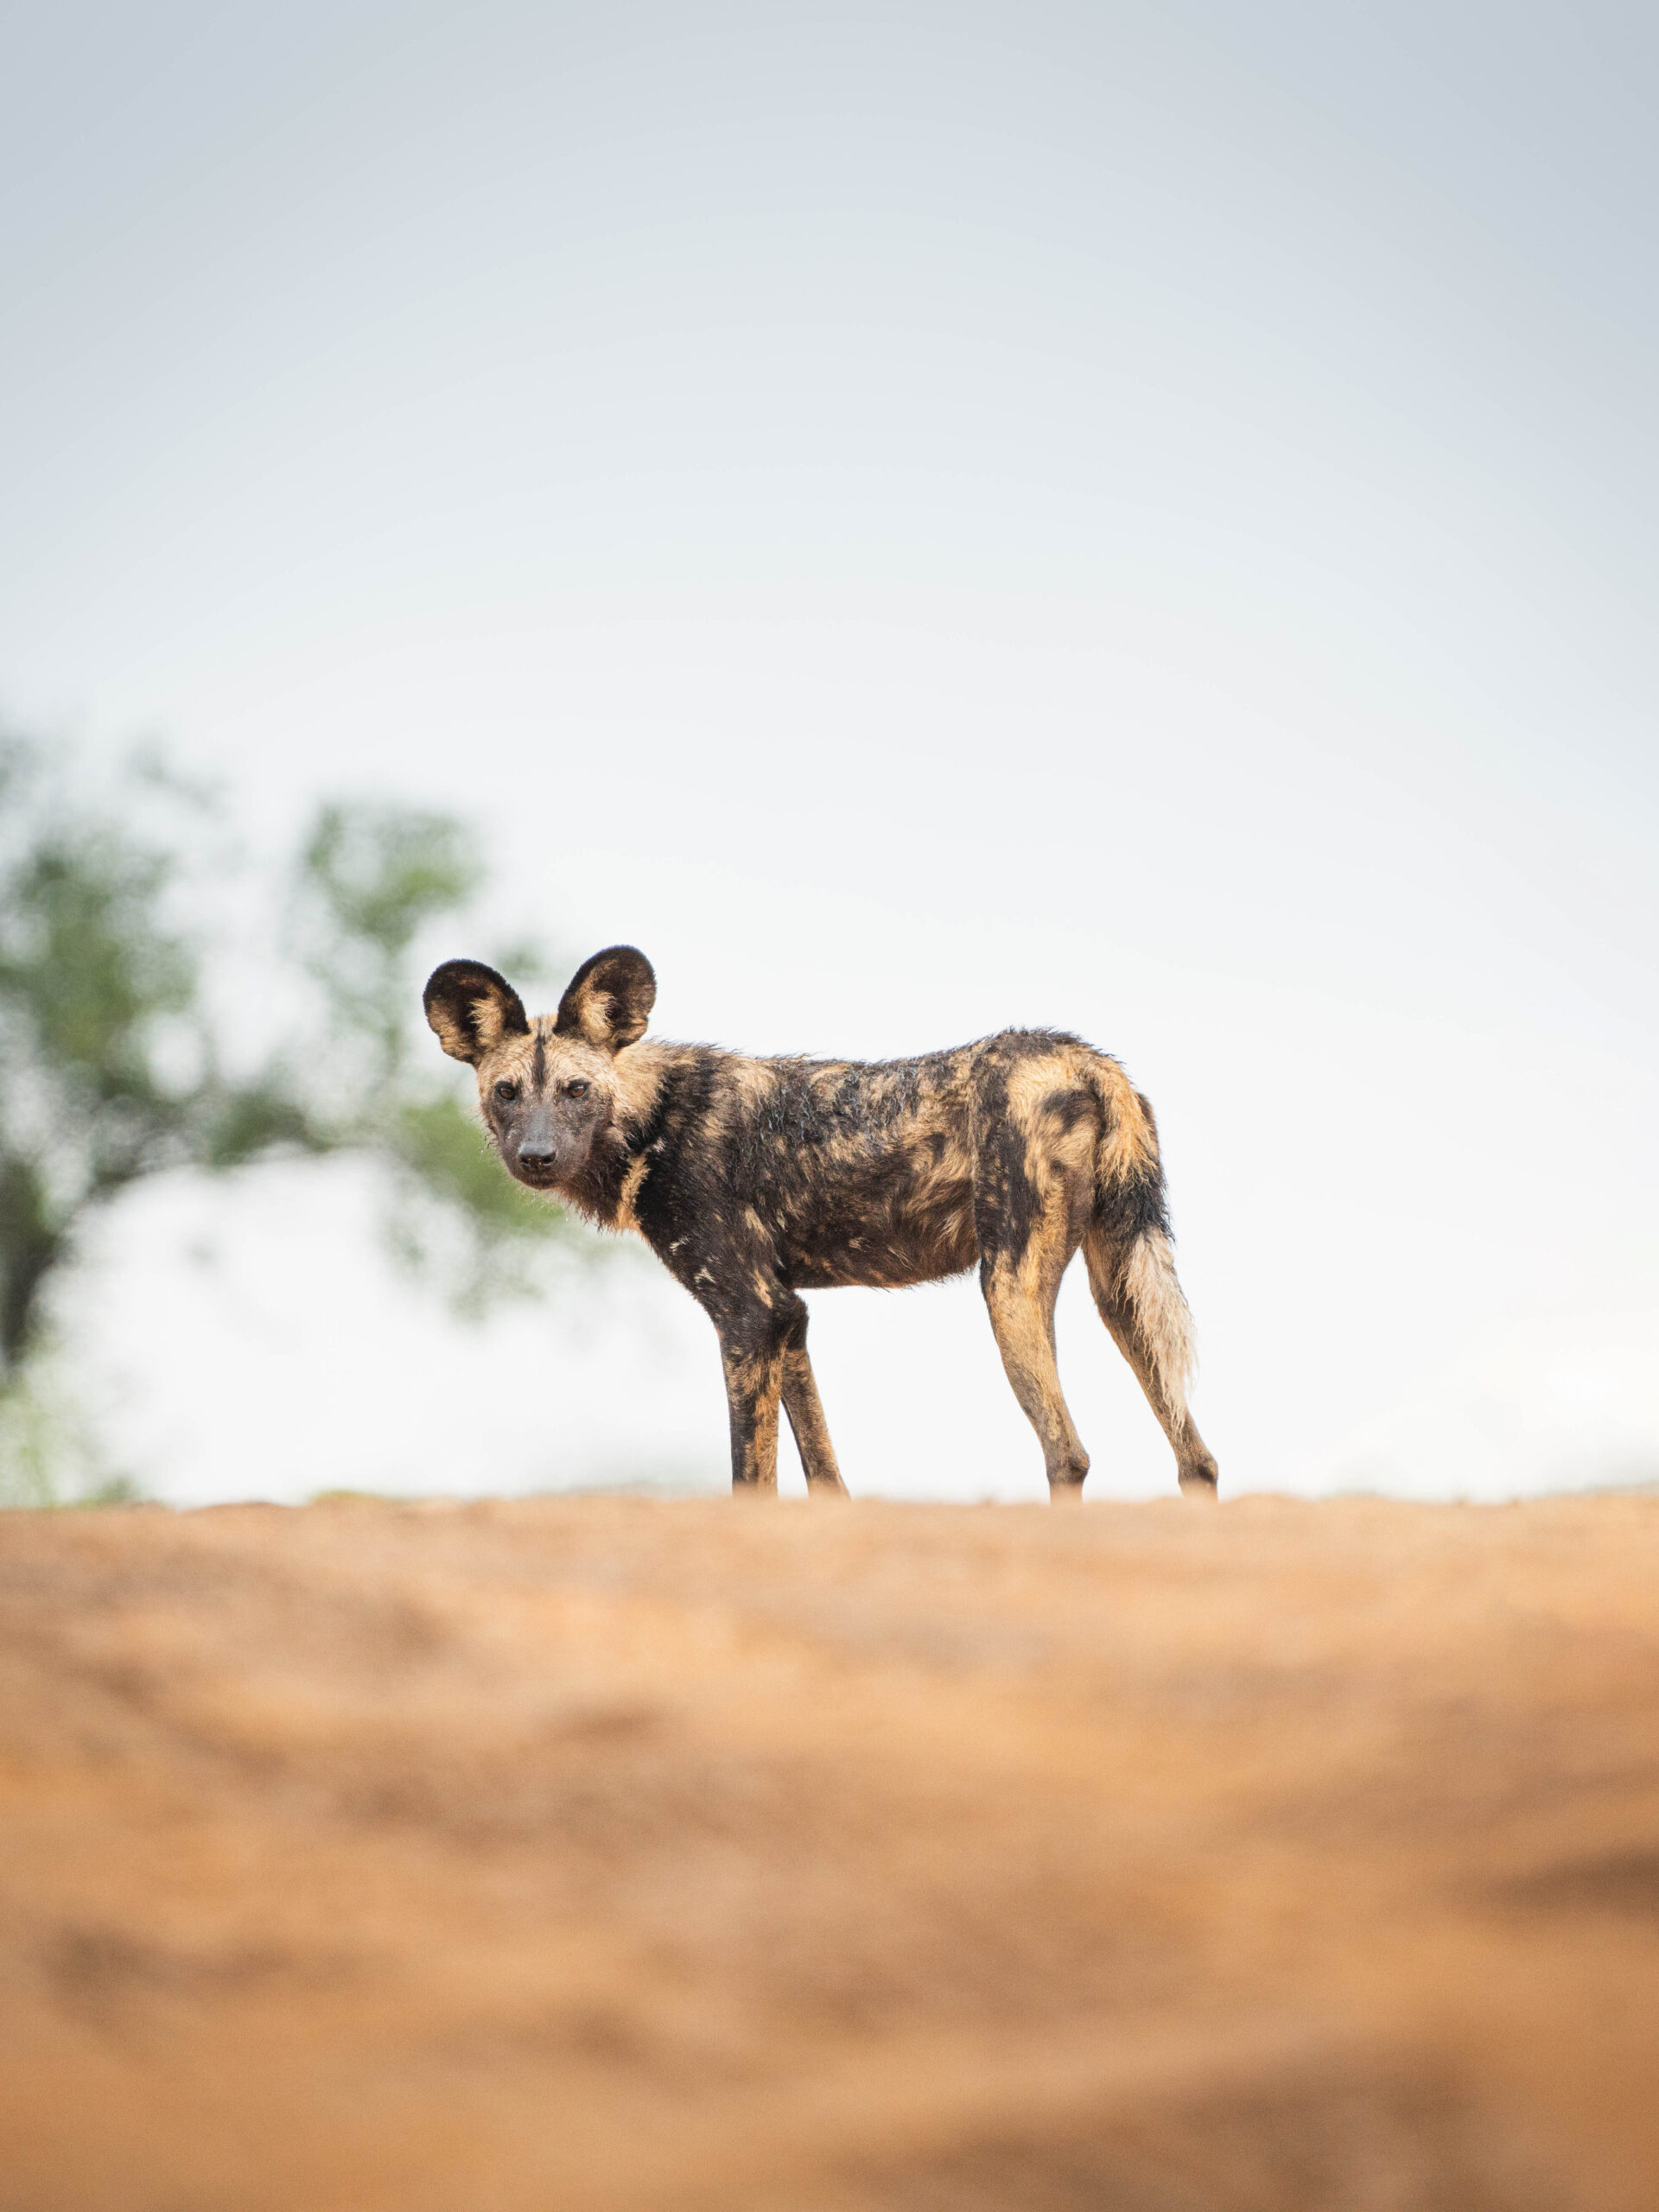 Wildlife Photography in the Kruger Park